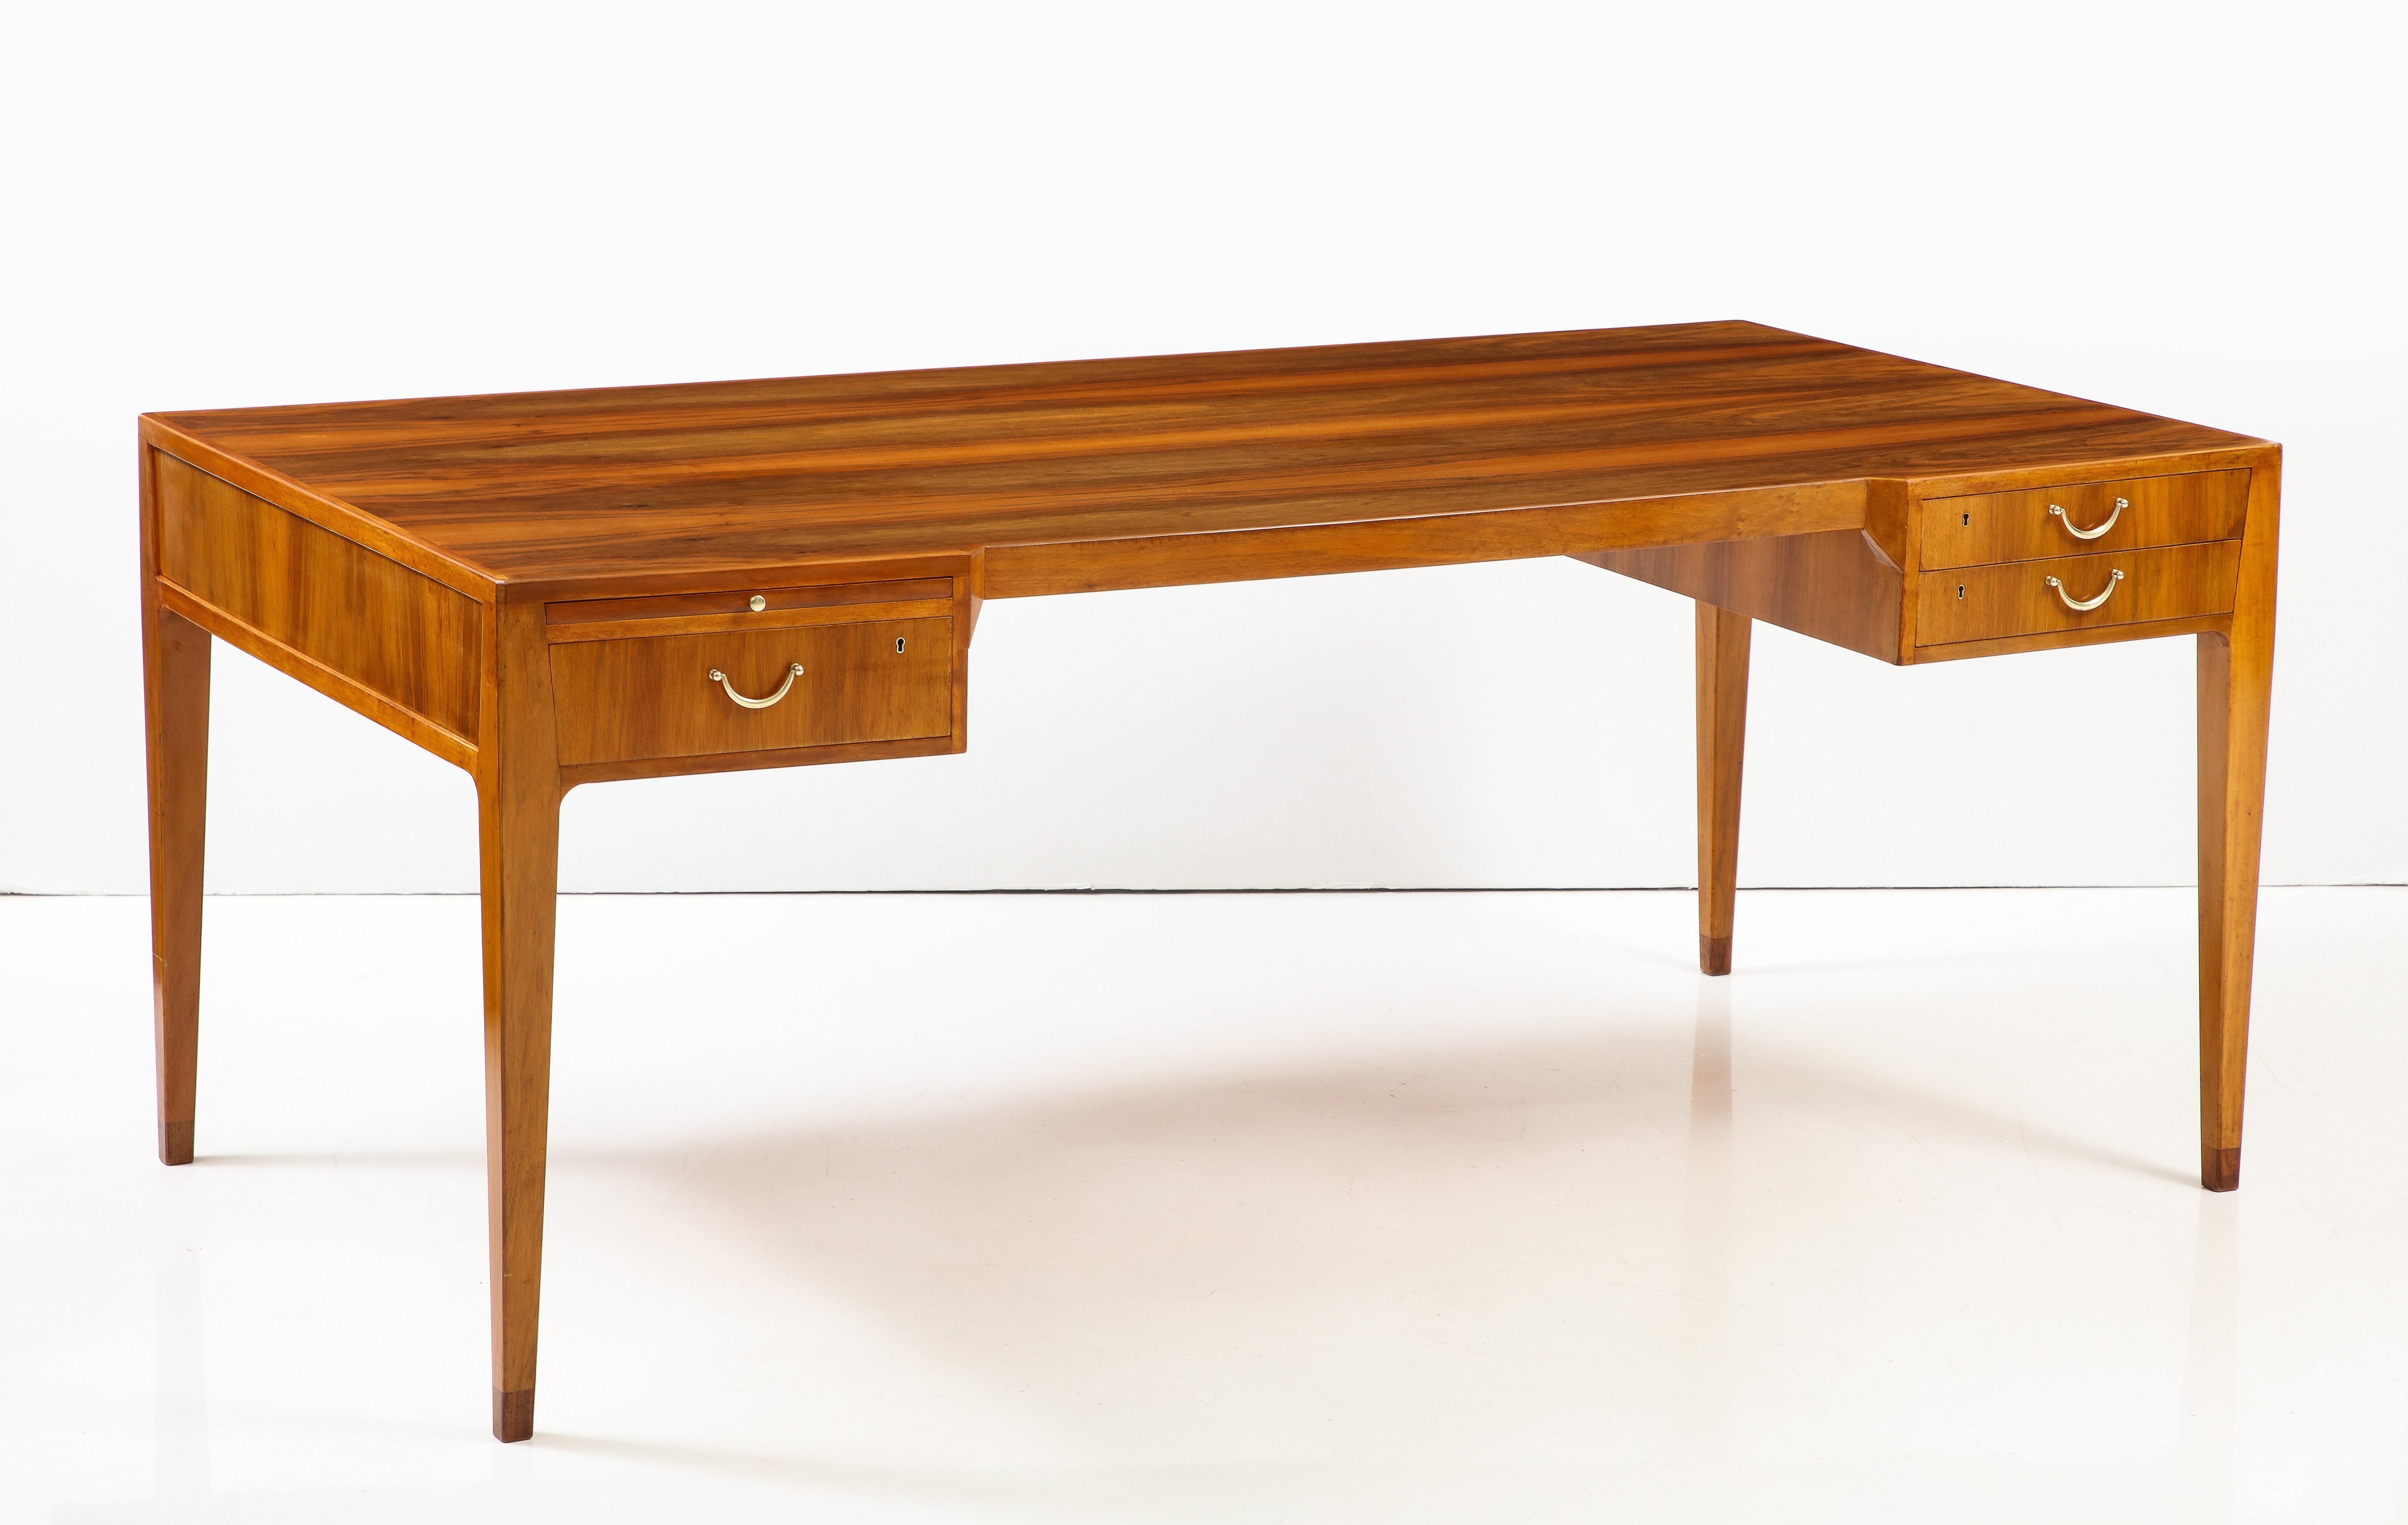 A Swedish Modern freestanding writing desk, in striking walnut, Circa 1960s, produced and sold by JKM - Jarnforsens Kontorsmöbler, Stockholm, the rectangular top with long walnut veneers, the sitter edge with a canted front, three short drawers and